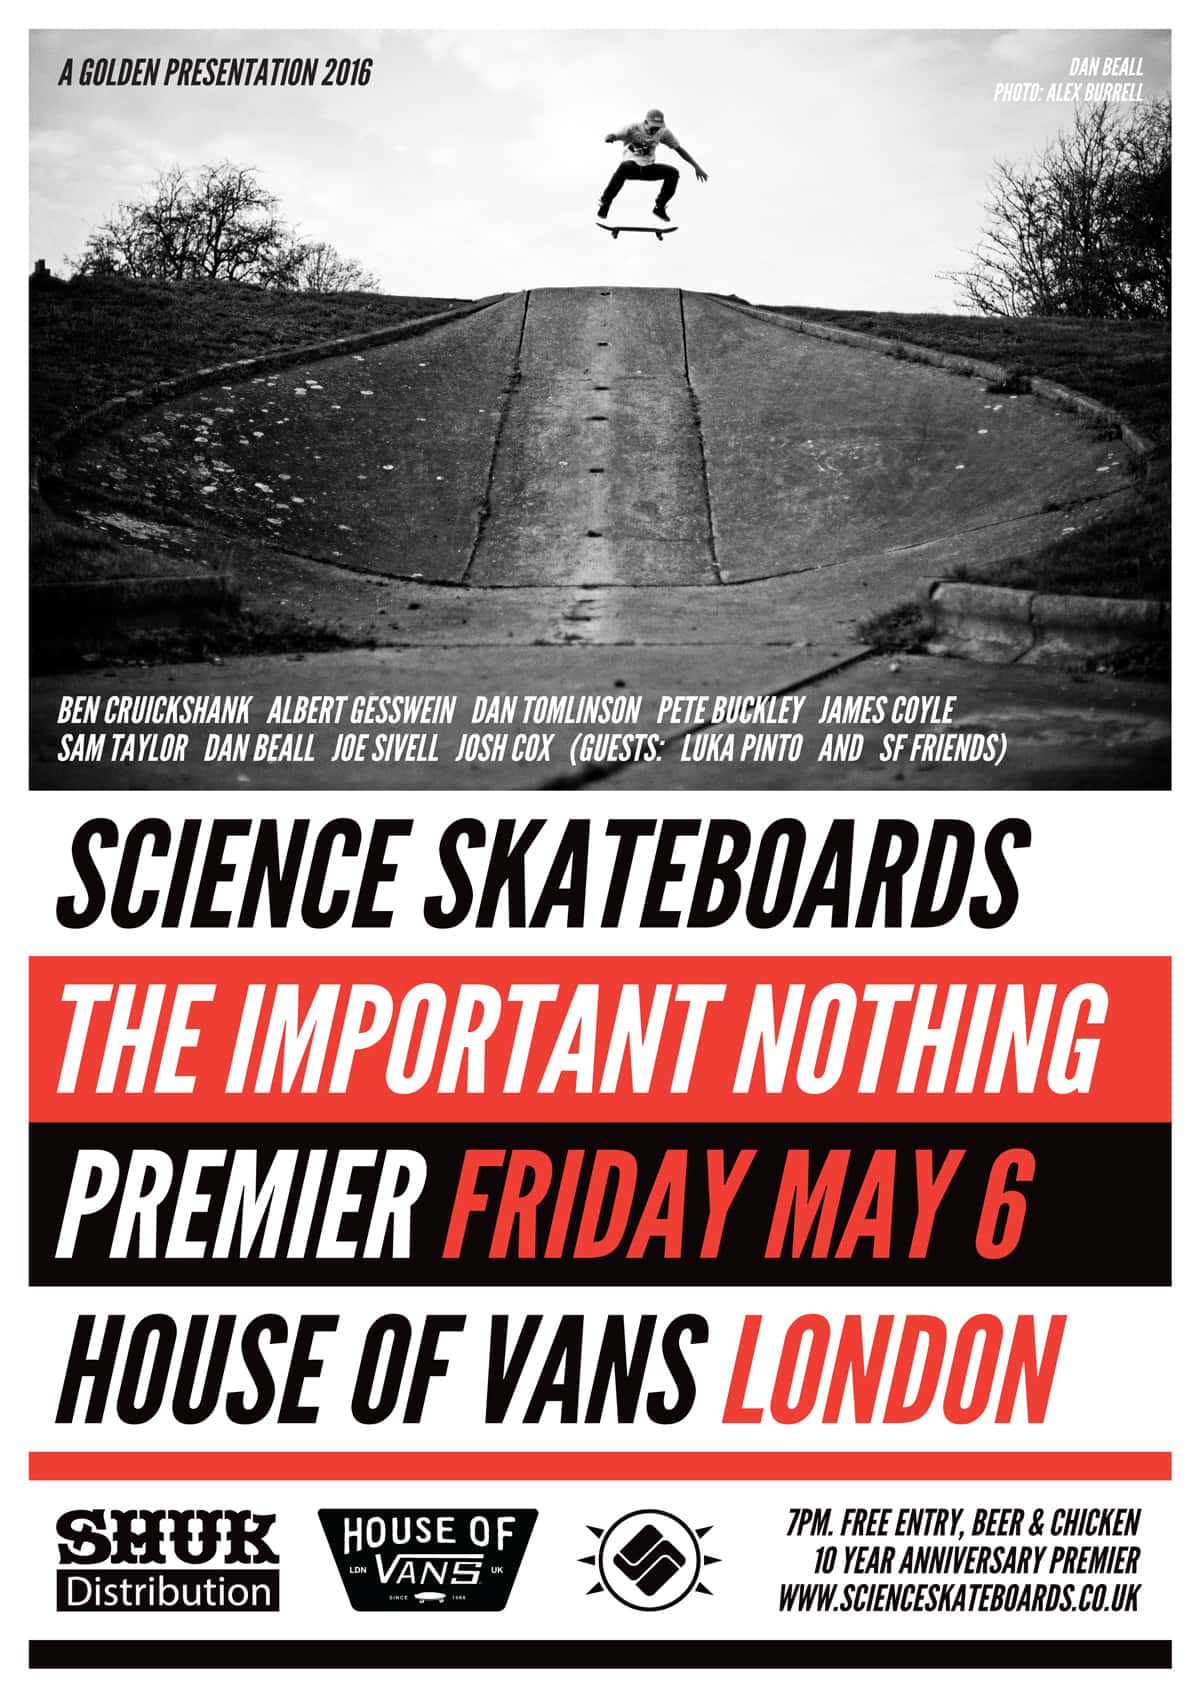 house of vans sk8 fry day london the important nothing premiere poster graphic design layout dan beall frontside flip photo alex burrell